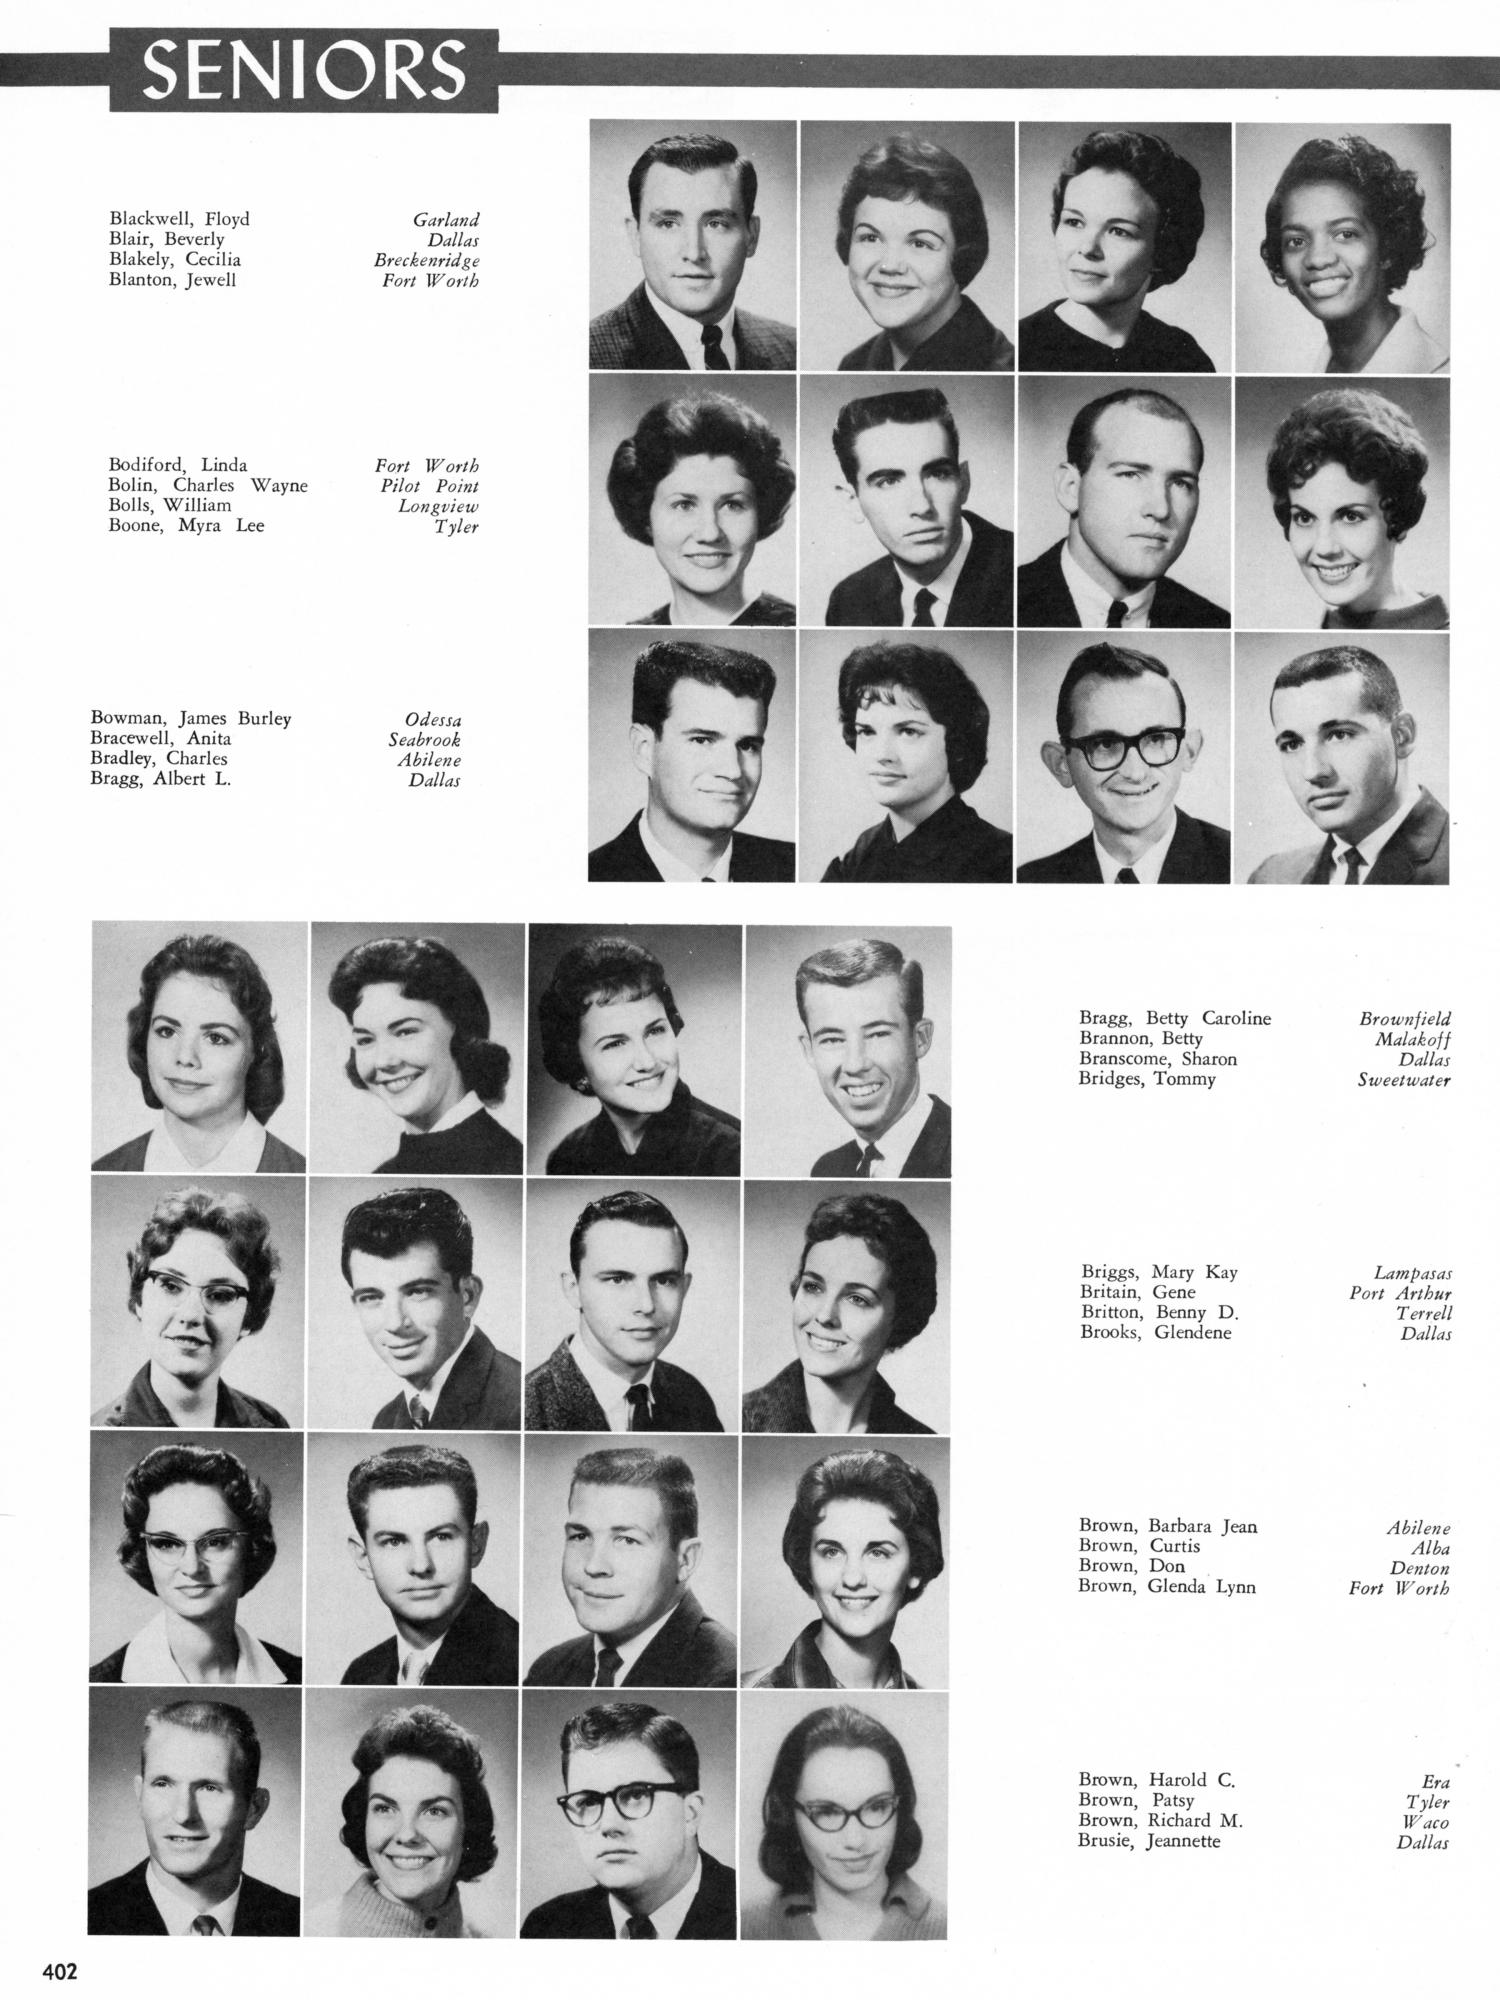 The Yucca, Yearbook of North Texas State College, 1961 - Page 402 - UNT  Digital Library